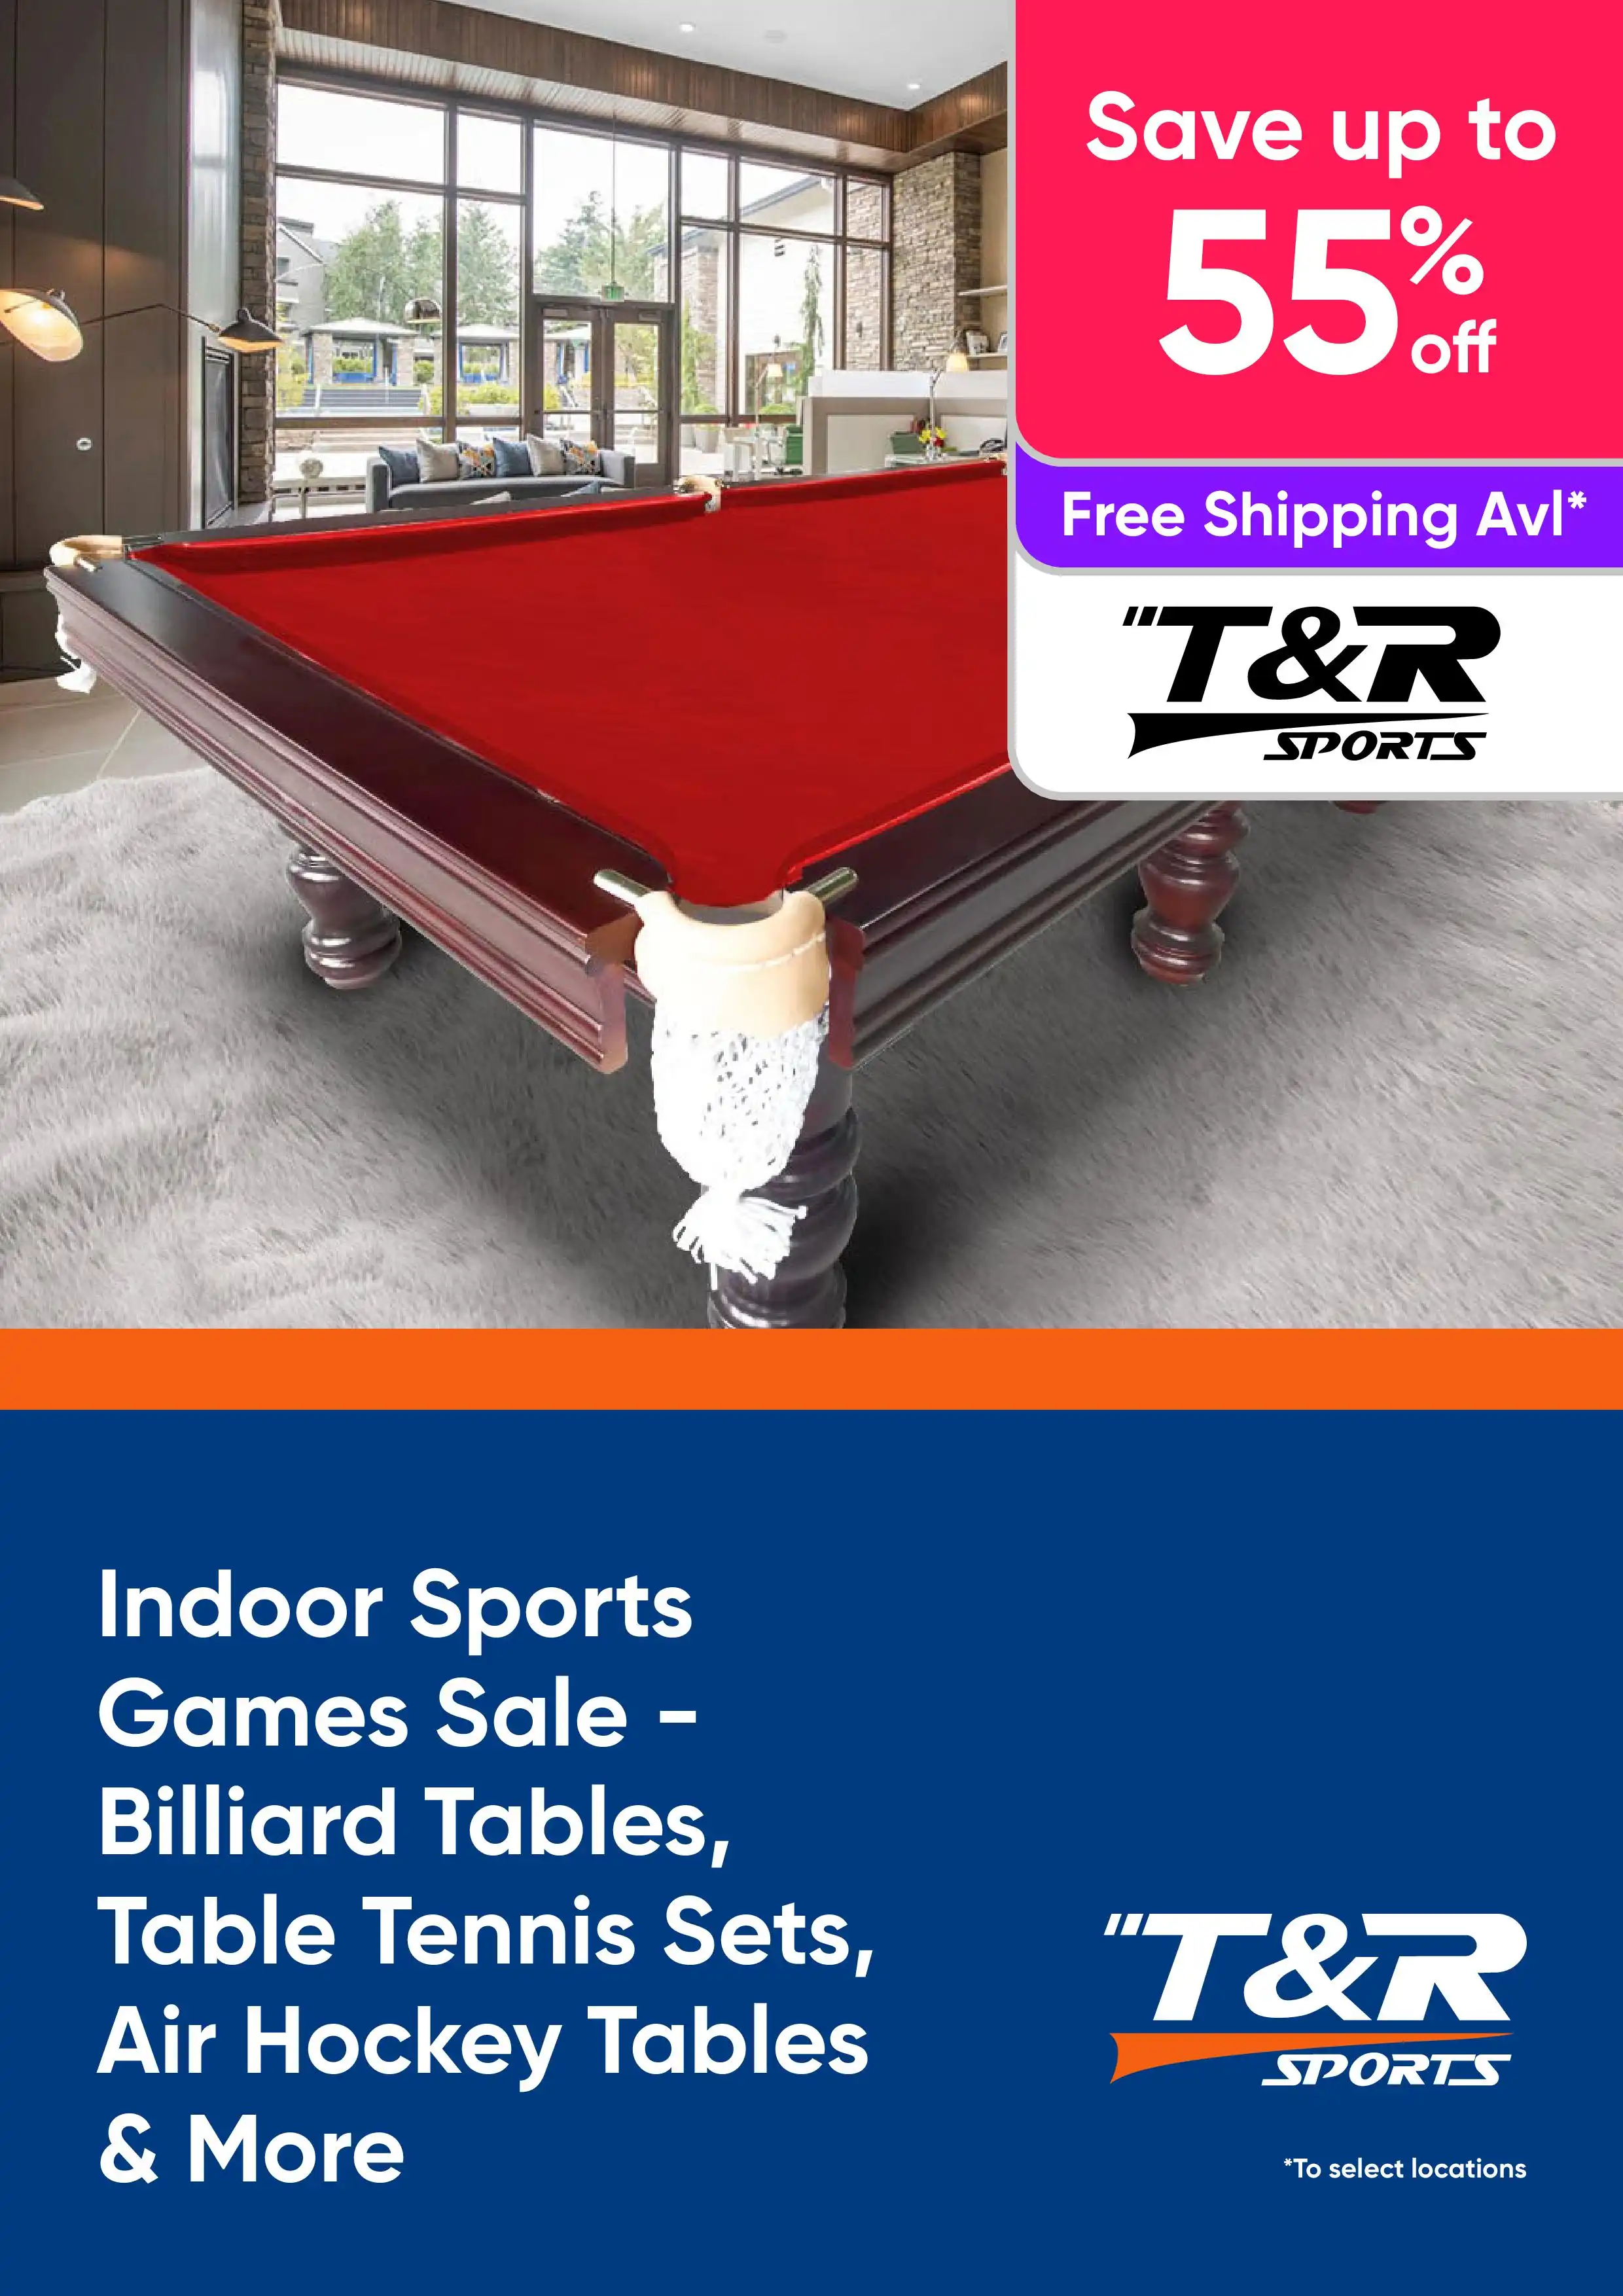 Game Tables Sale - Shop Billiard Tables, Table Tennis Sets and More Up to 55% Off